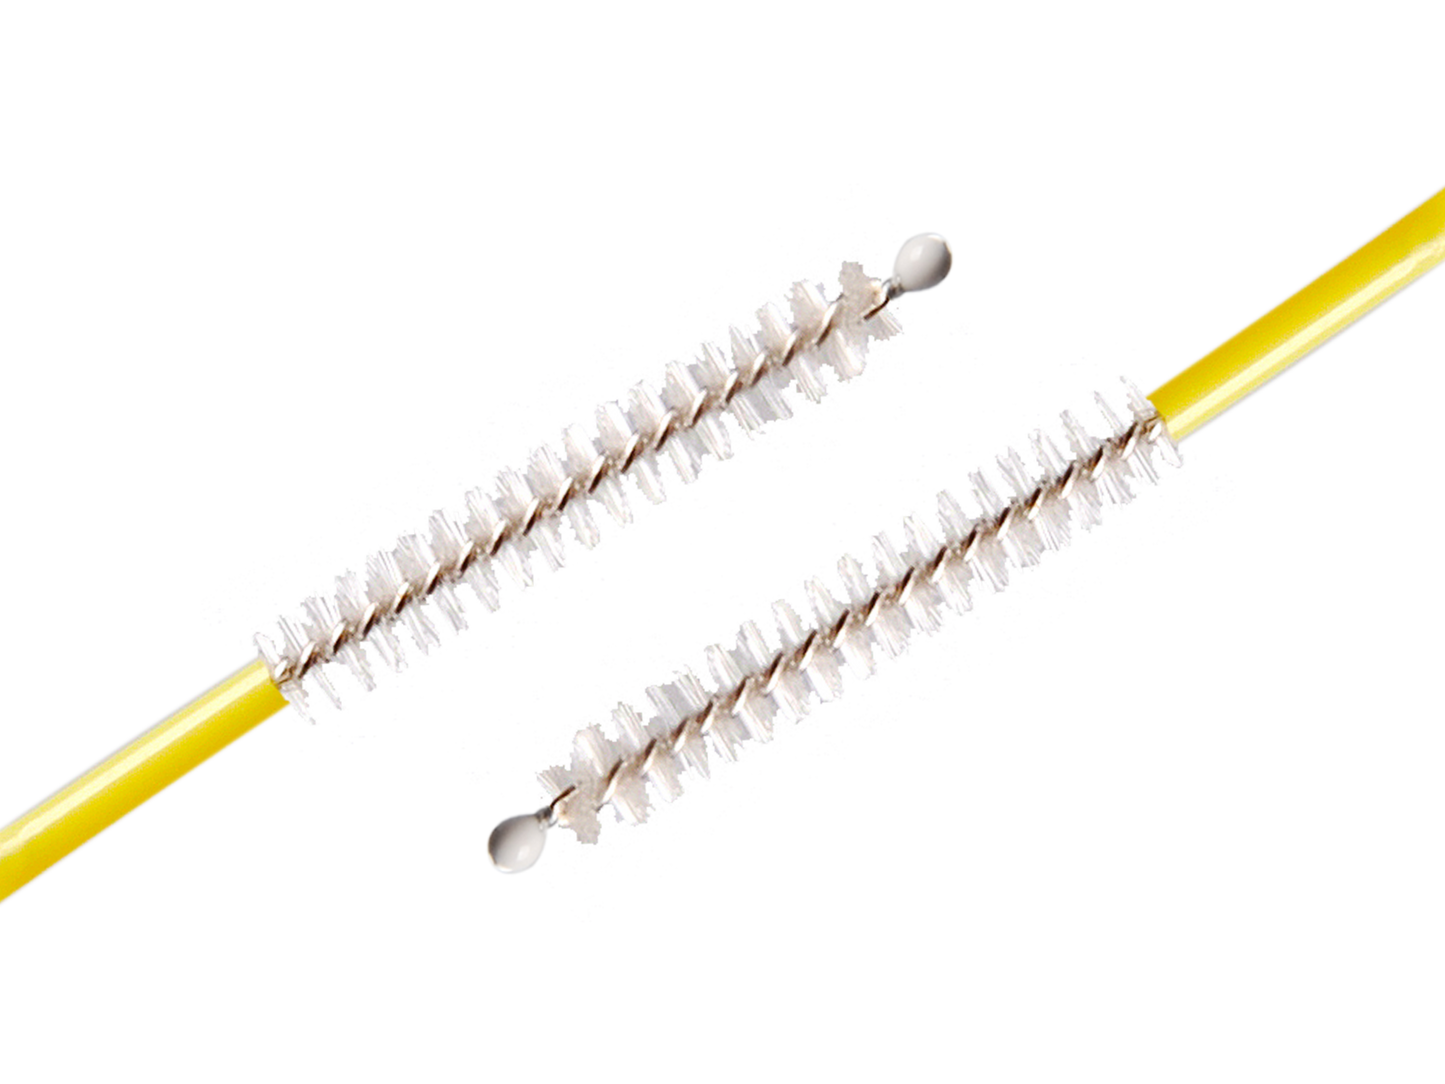 Cleaning Brush - Double End Symmetric Push-Pull